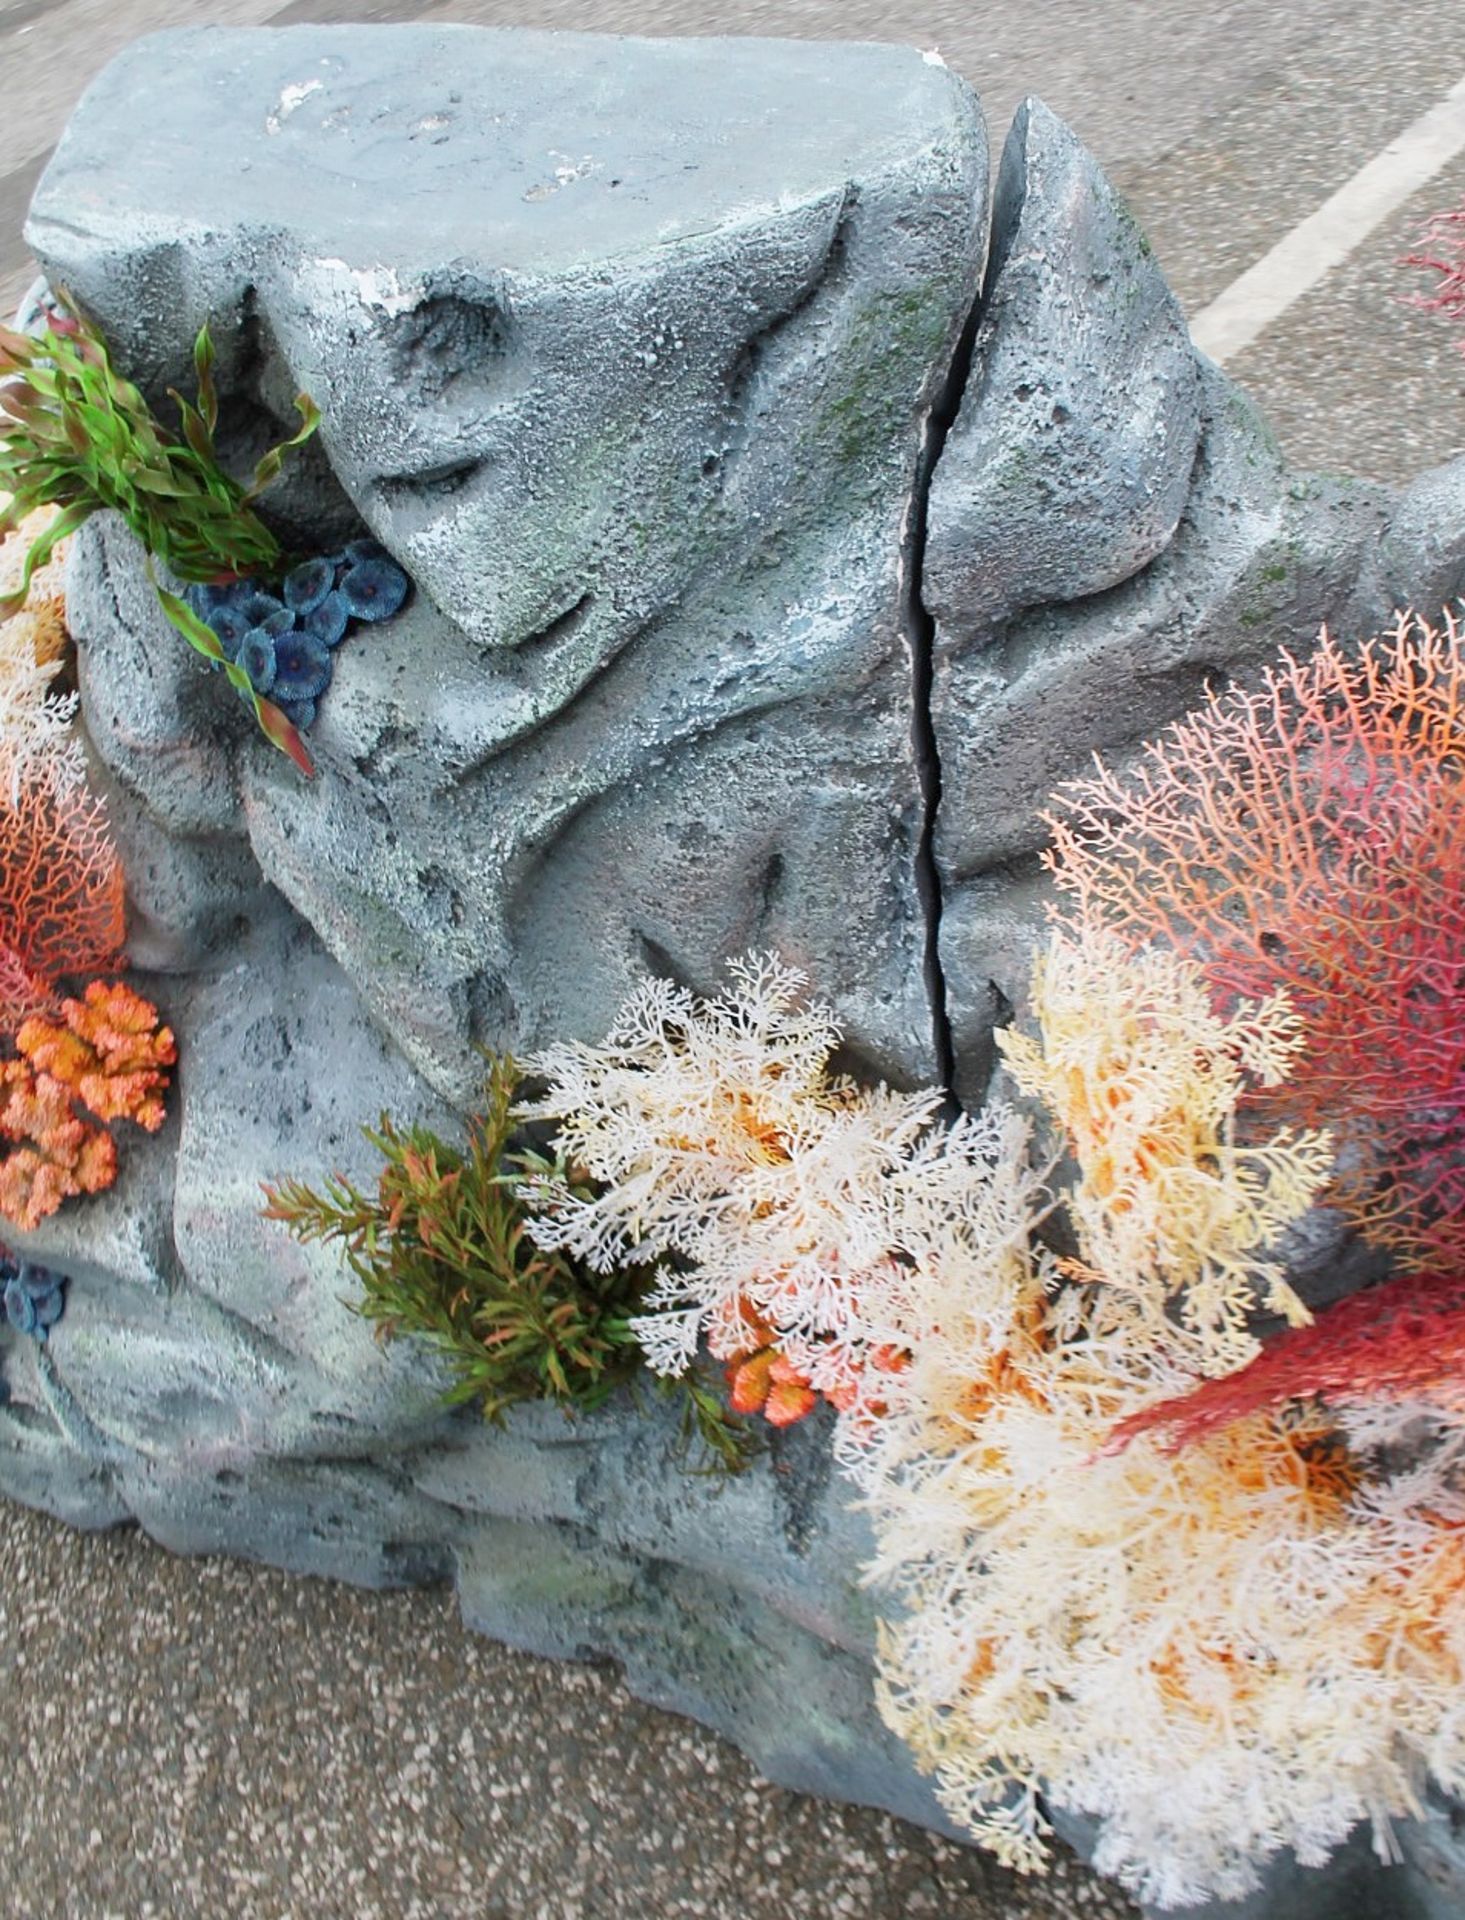 1 x Bespoke Coral Reef Shop Display / Theatre Stage Prop - 2.8 Metres Long - Recently Removed From A - Image 6 of 9